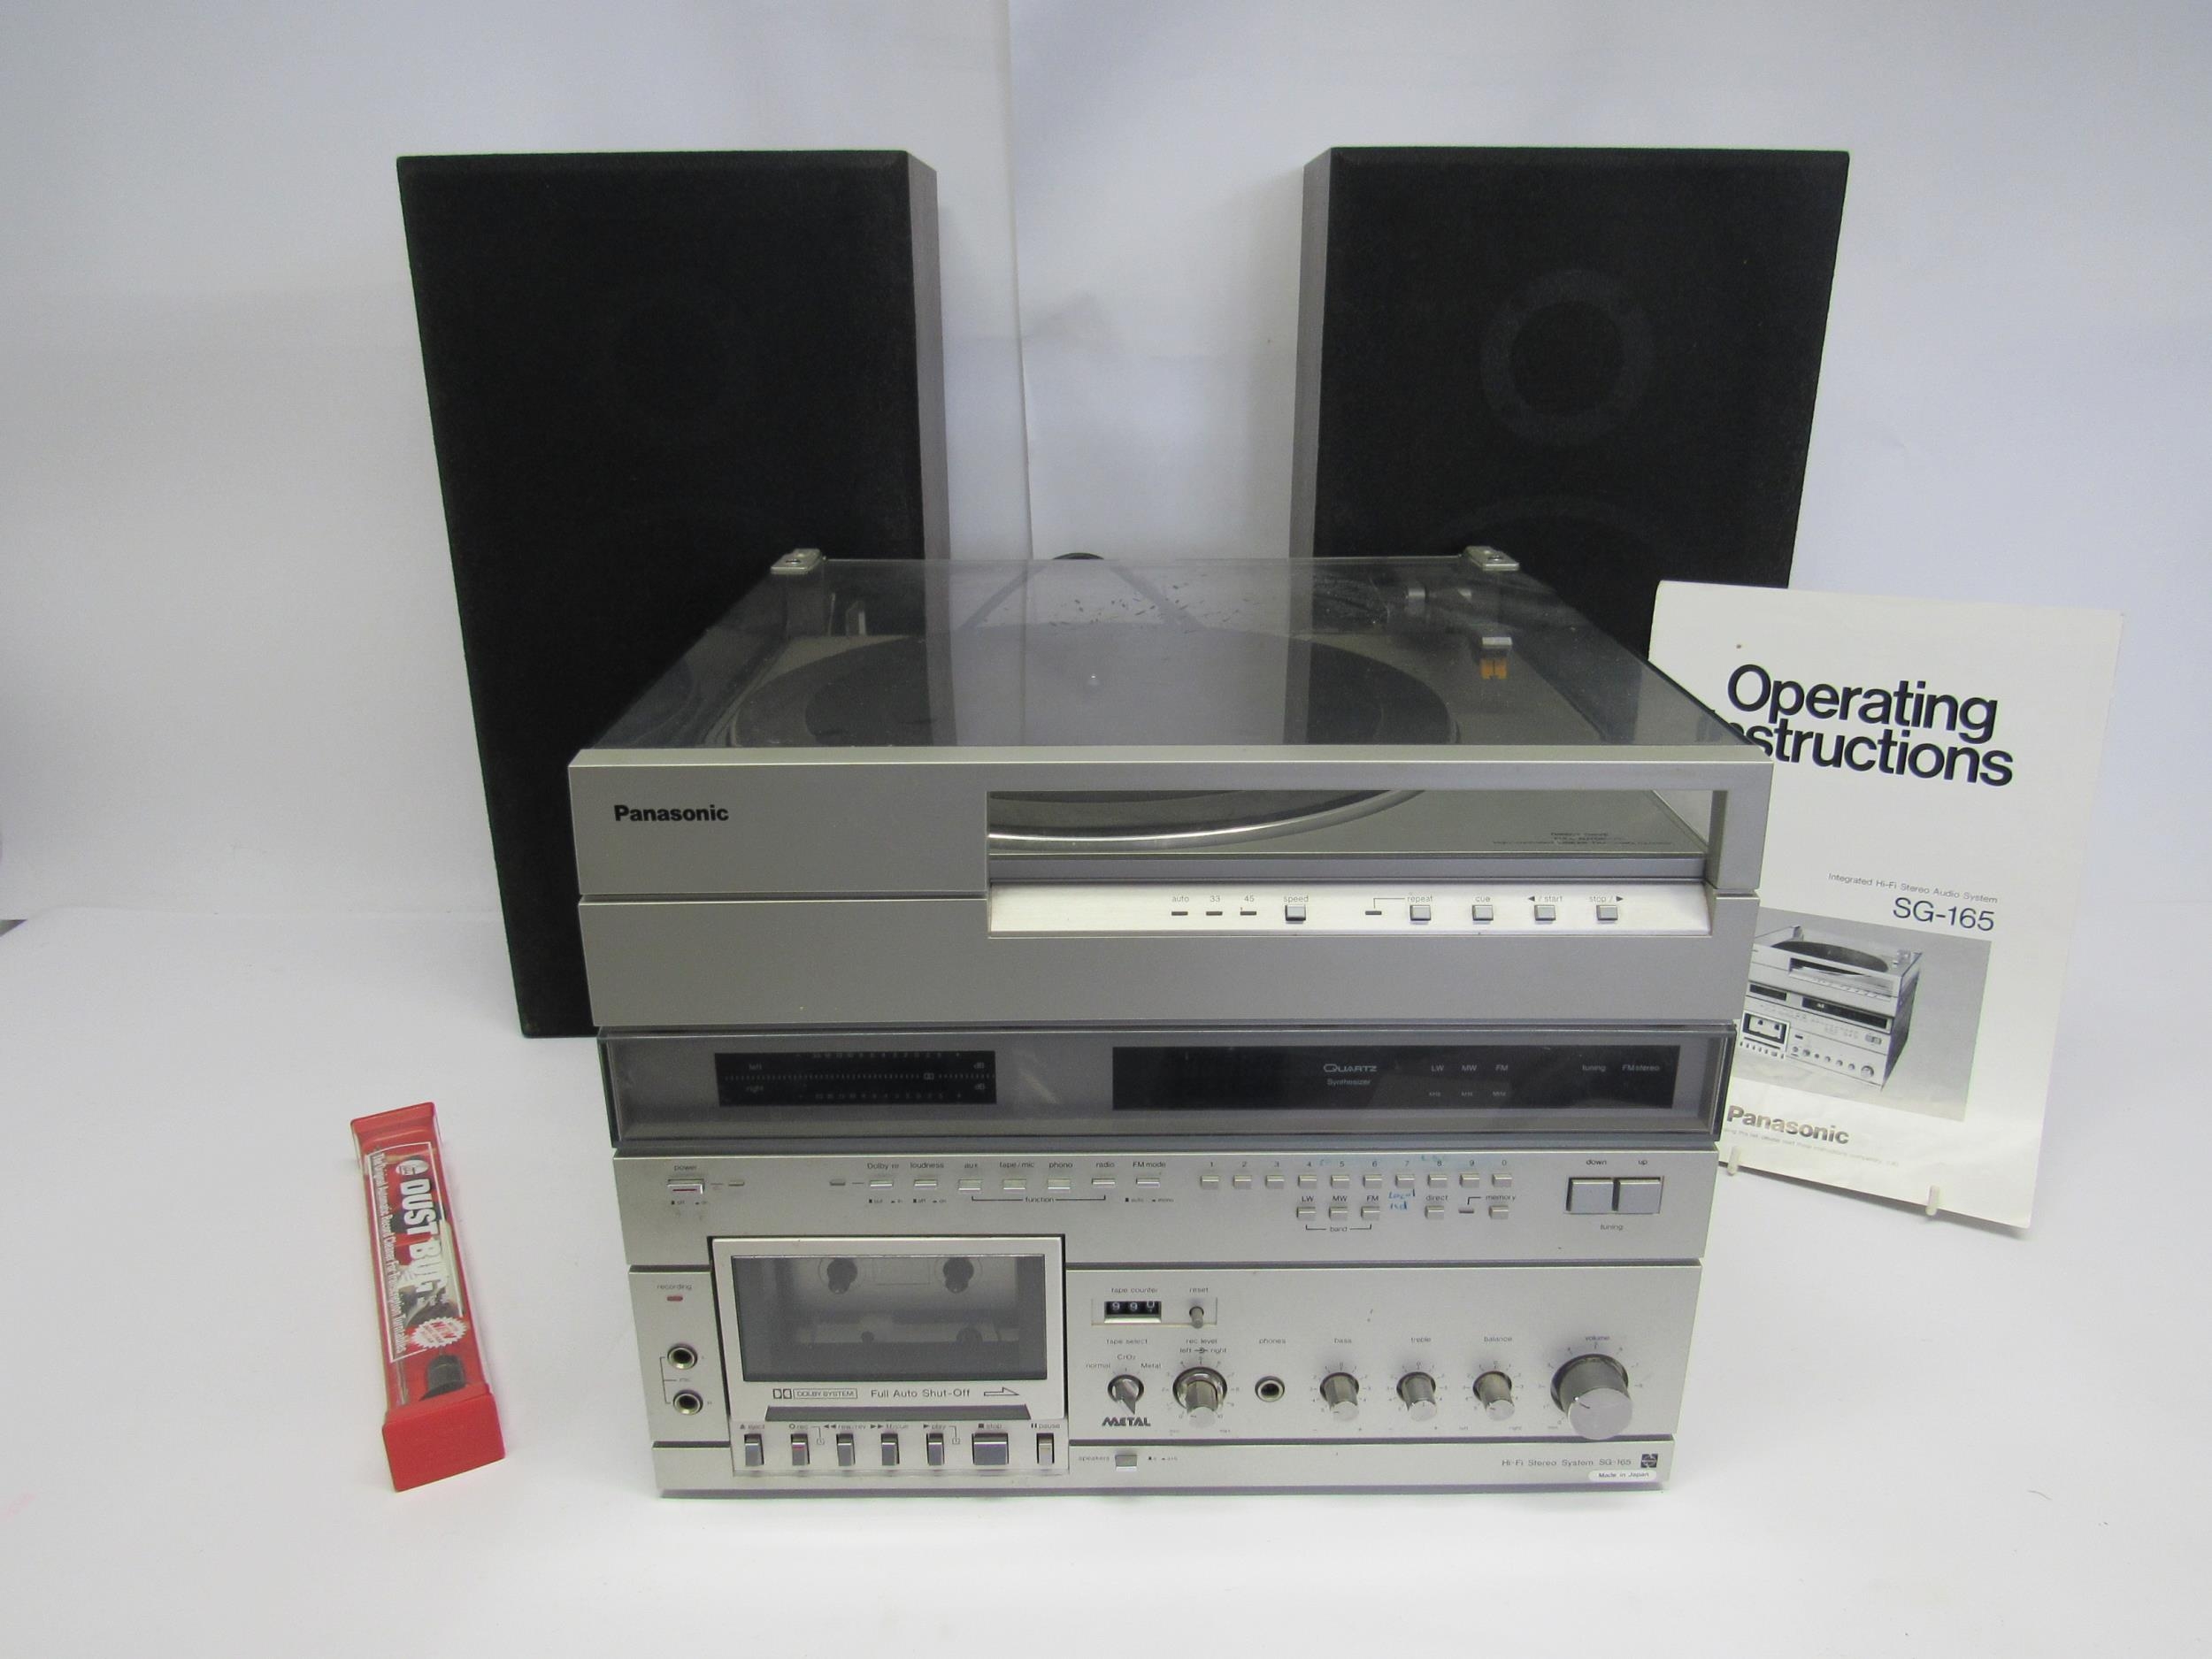 A Panasonic SG-165 integrated hi-fi stereo audio system with speakers